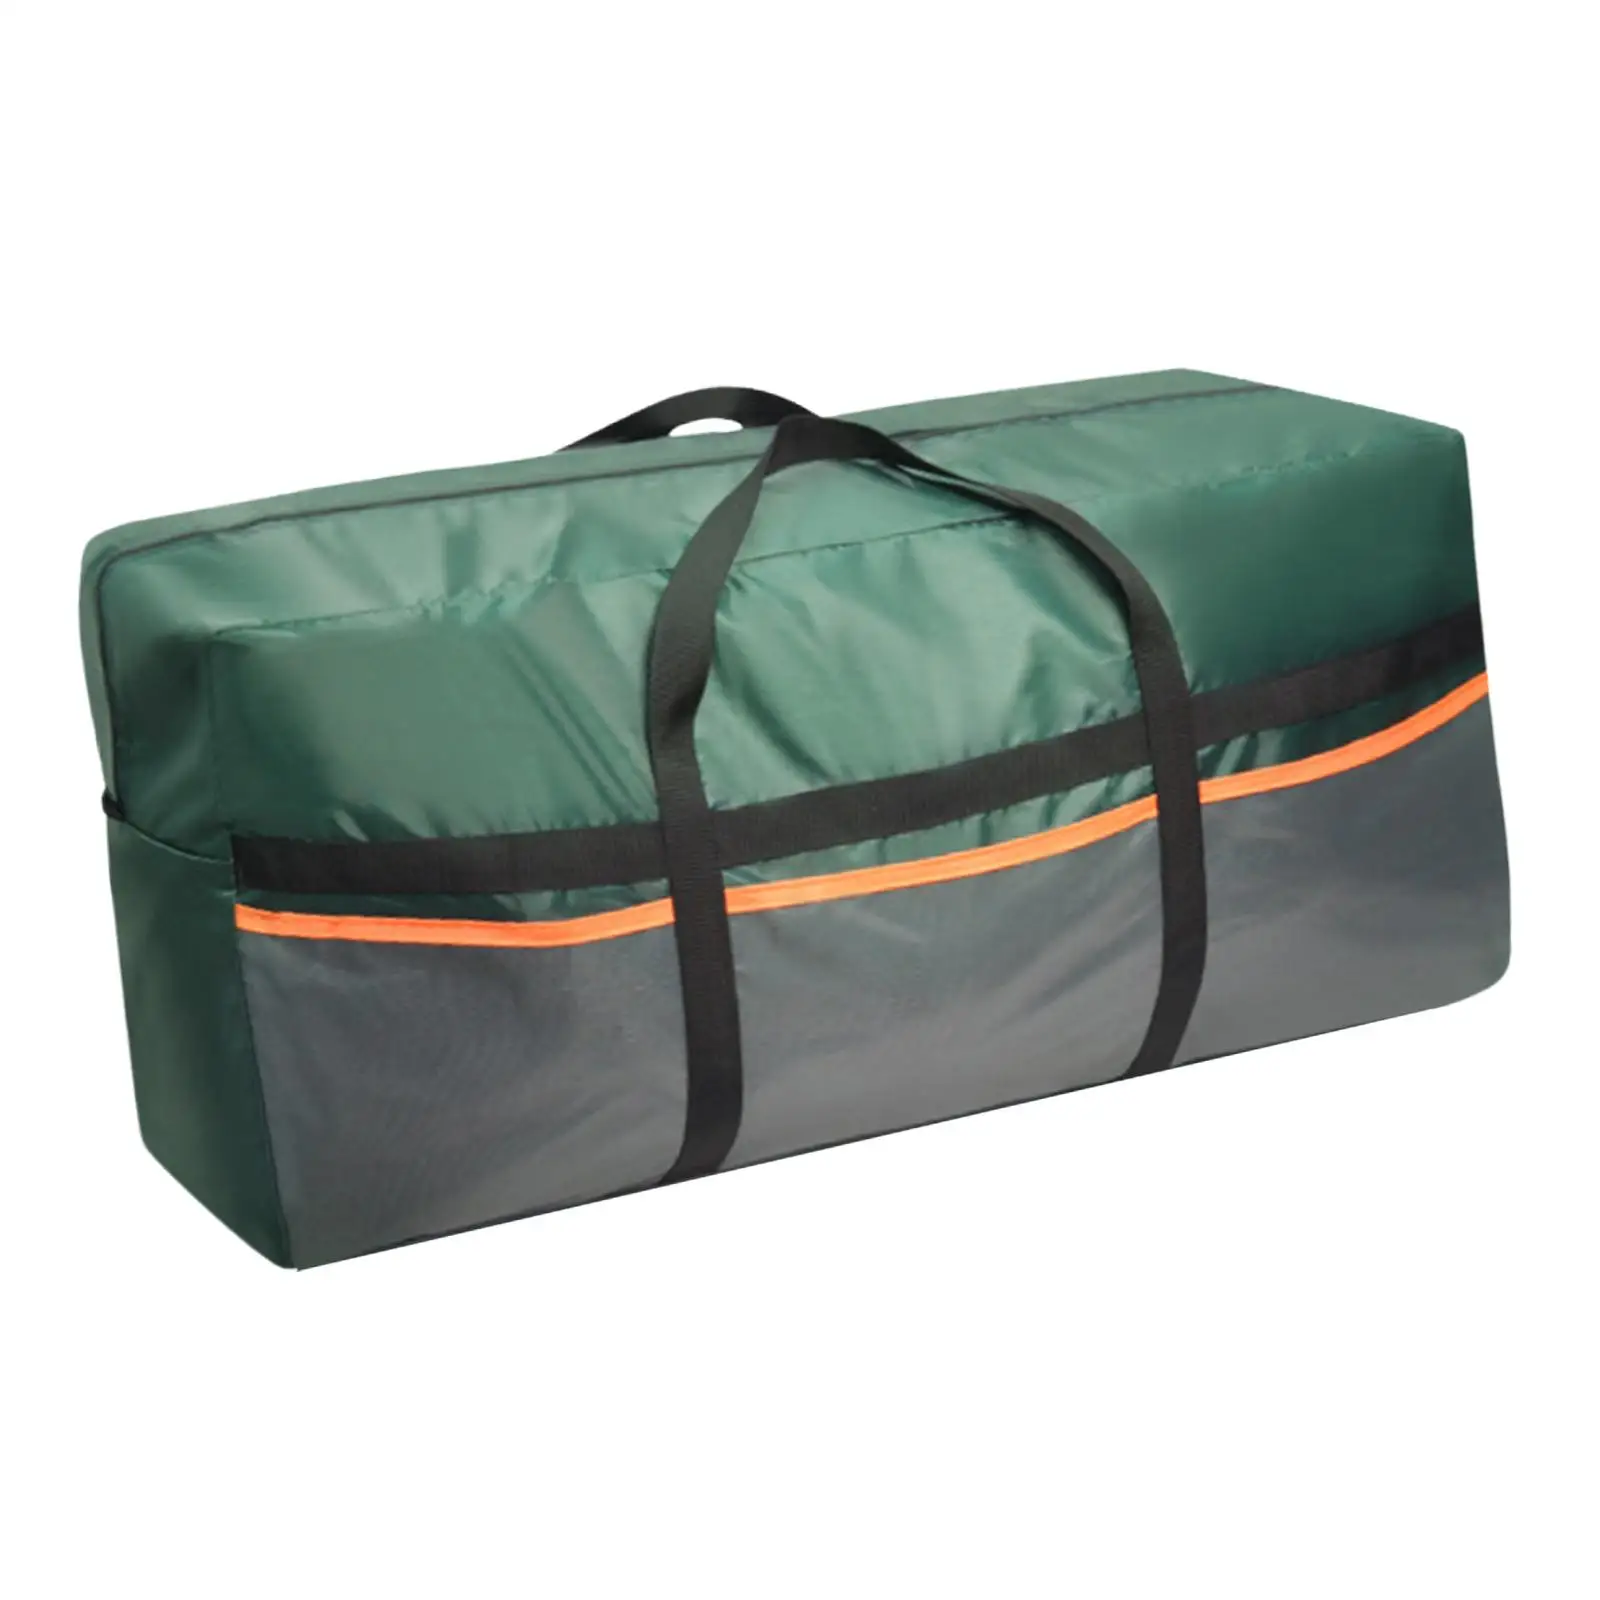 Tent Storage Bag Waterproof Carrier Container Reusable Pouch Zippered Duffel Bag for Travel Picnic Gardening Backpacking Outdoor